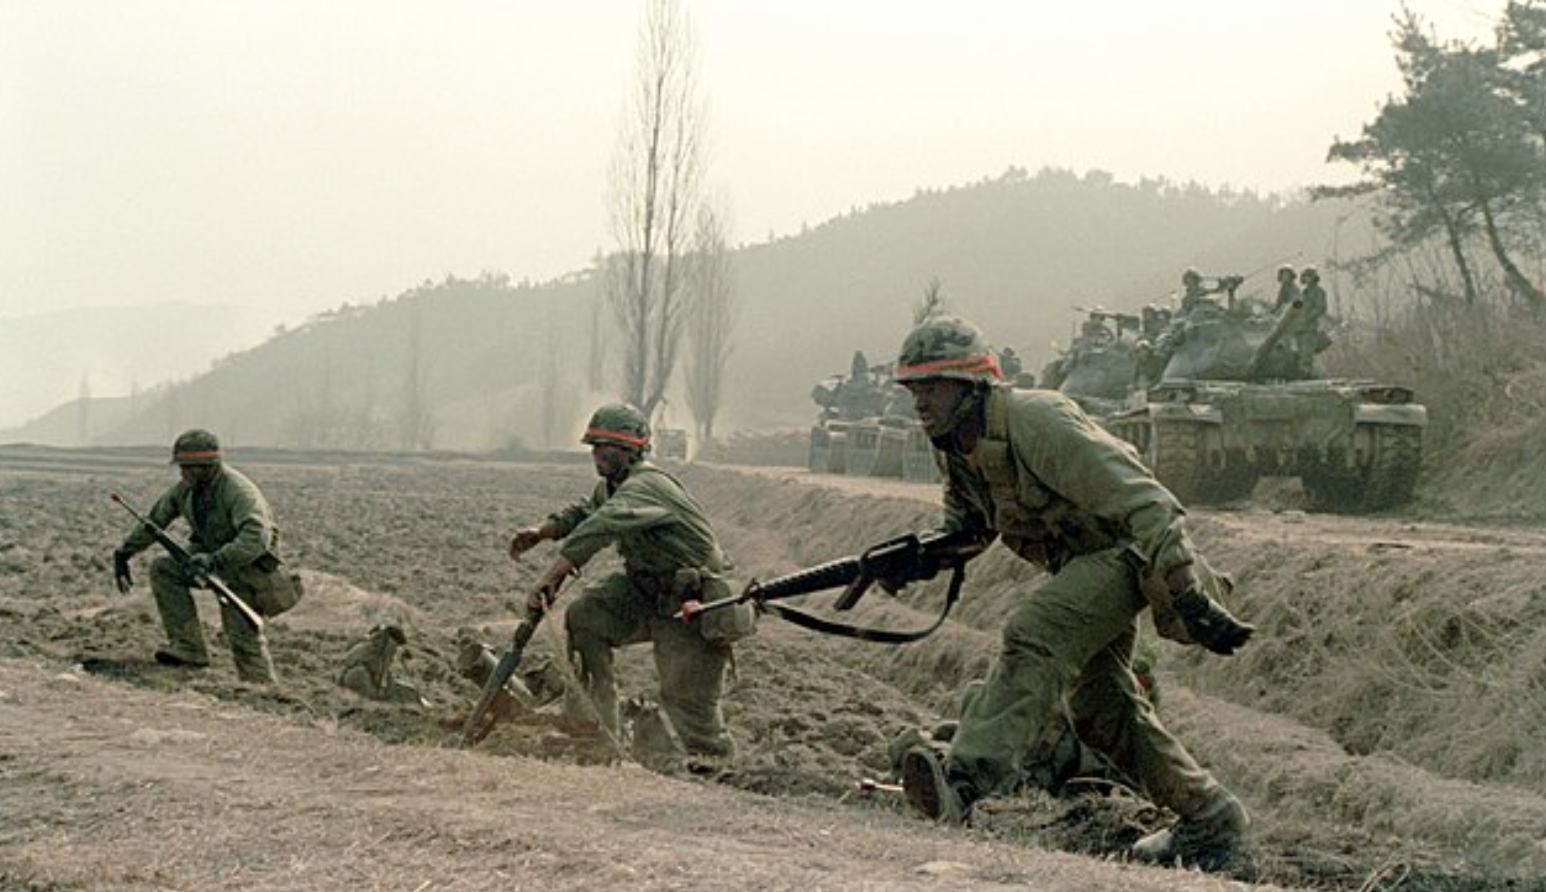 Members of Company C, 1ST Battalion, 5th Infantry, 25th Infantry Division, move out to attack opposing forces. Public domain